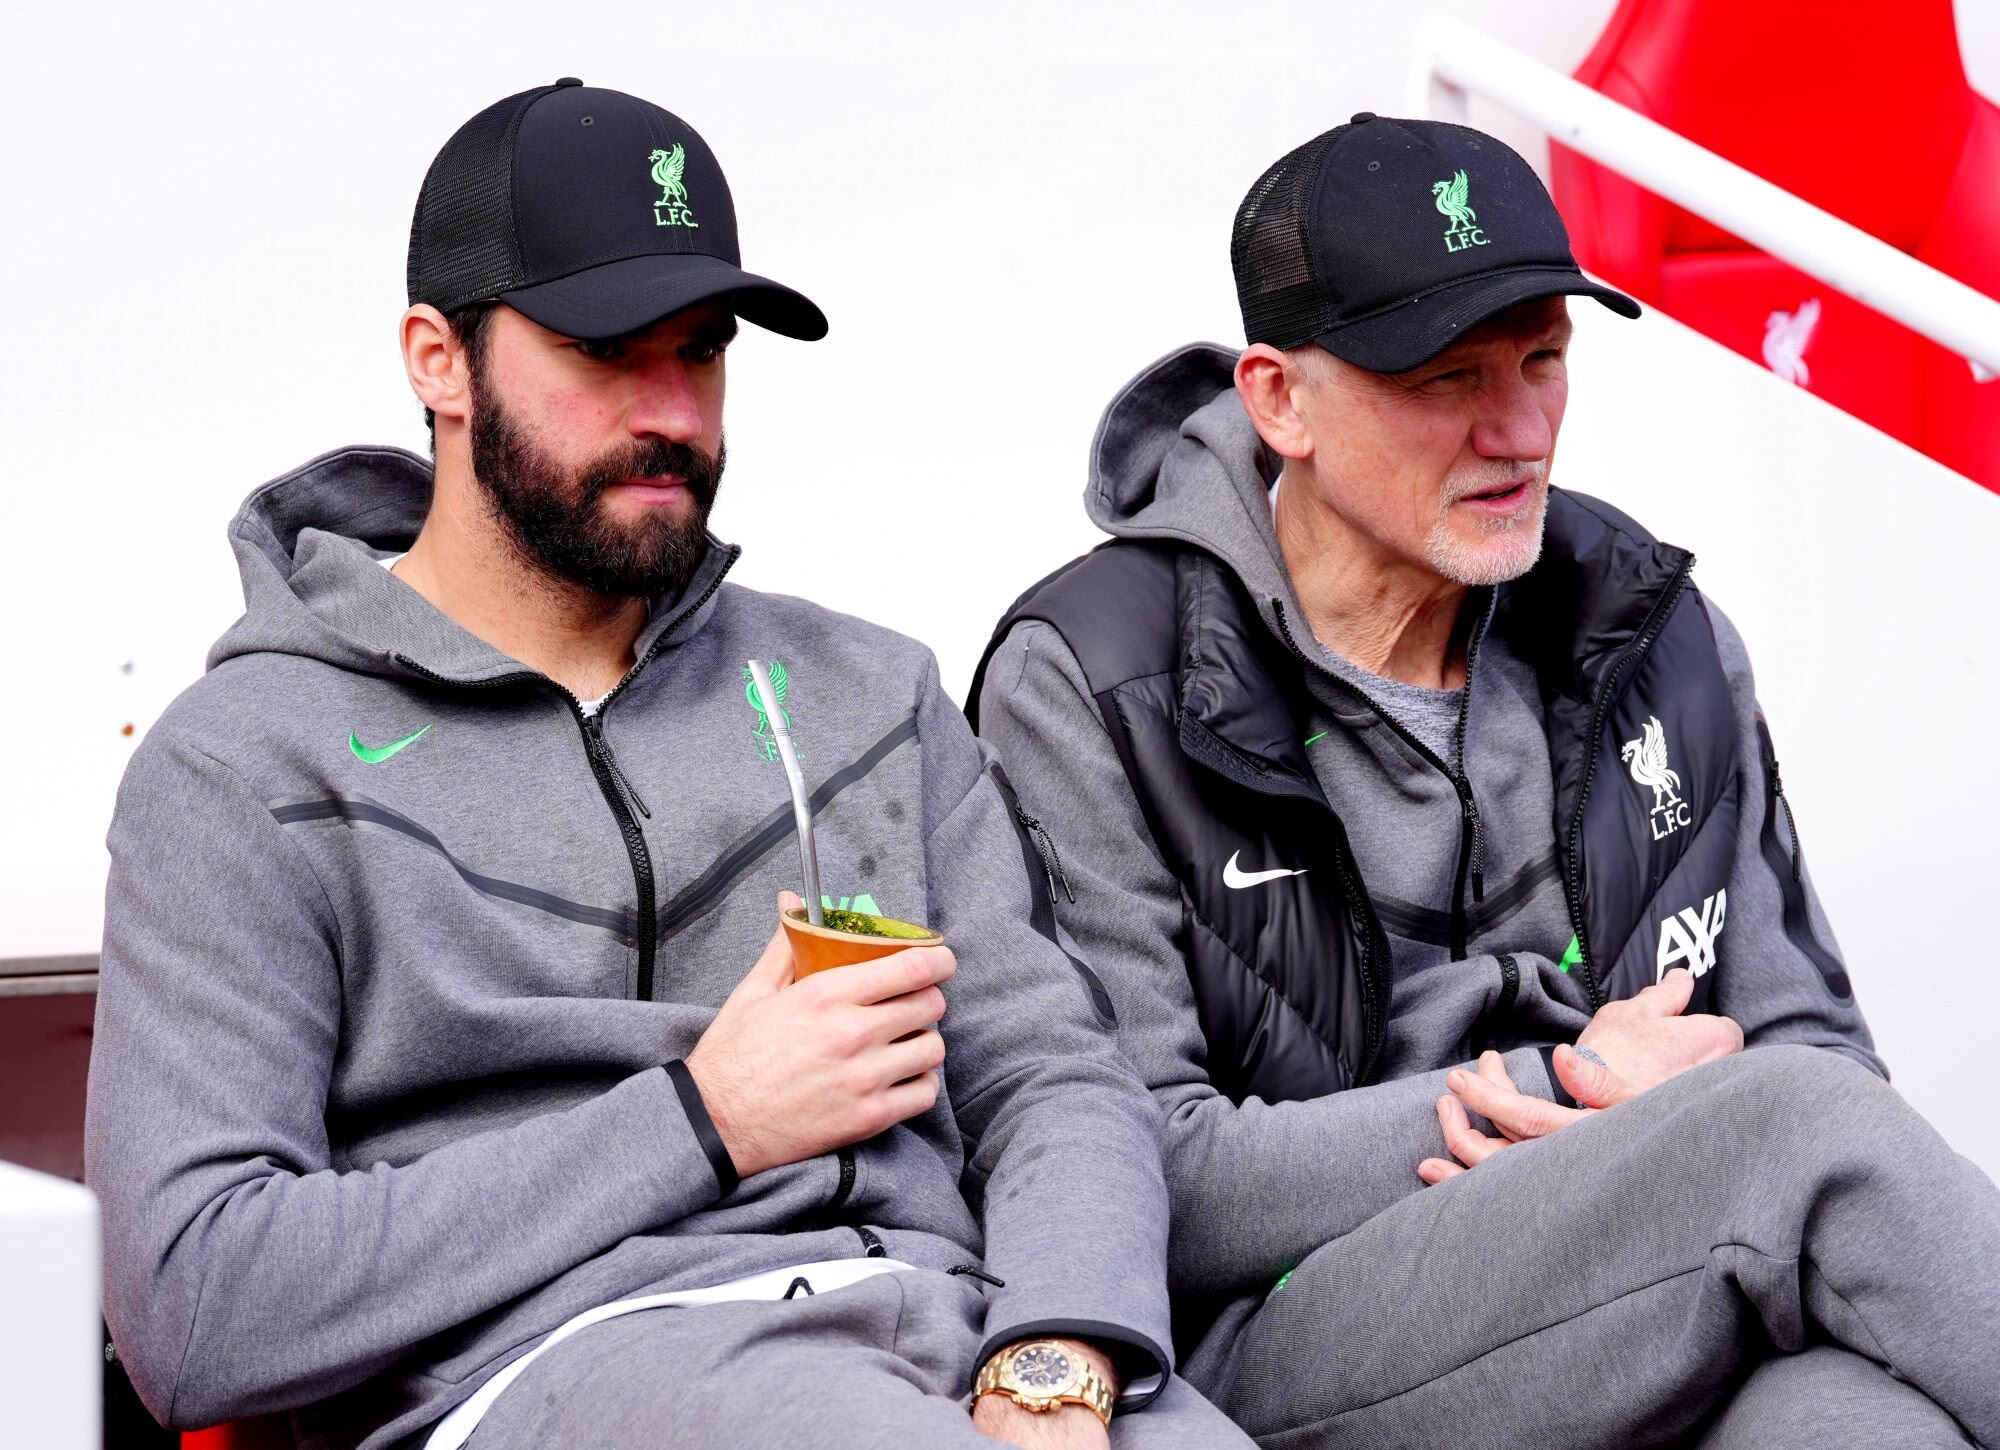 Liverpool coach reveals just HOW CLOSE the club came to losing Alisson Becker this summer